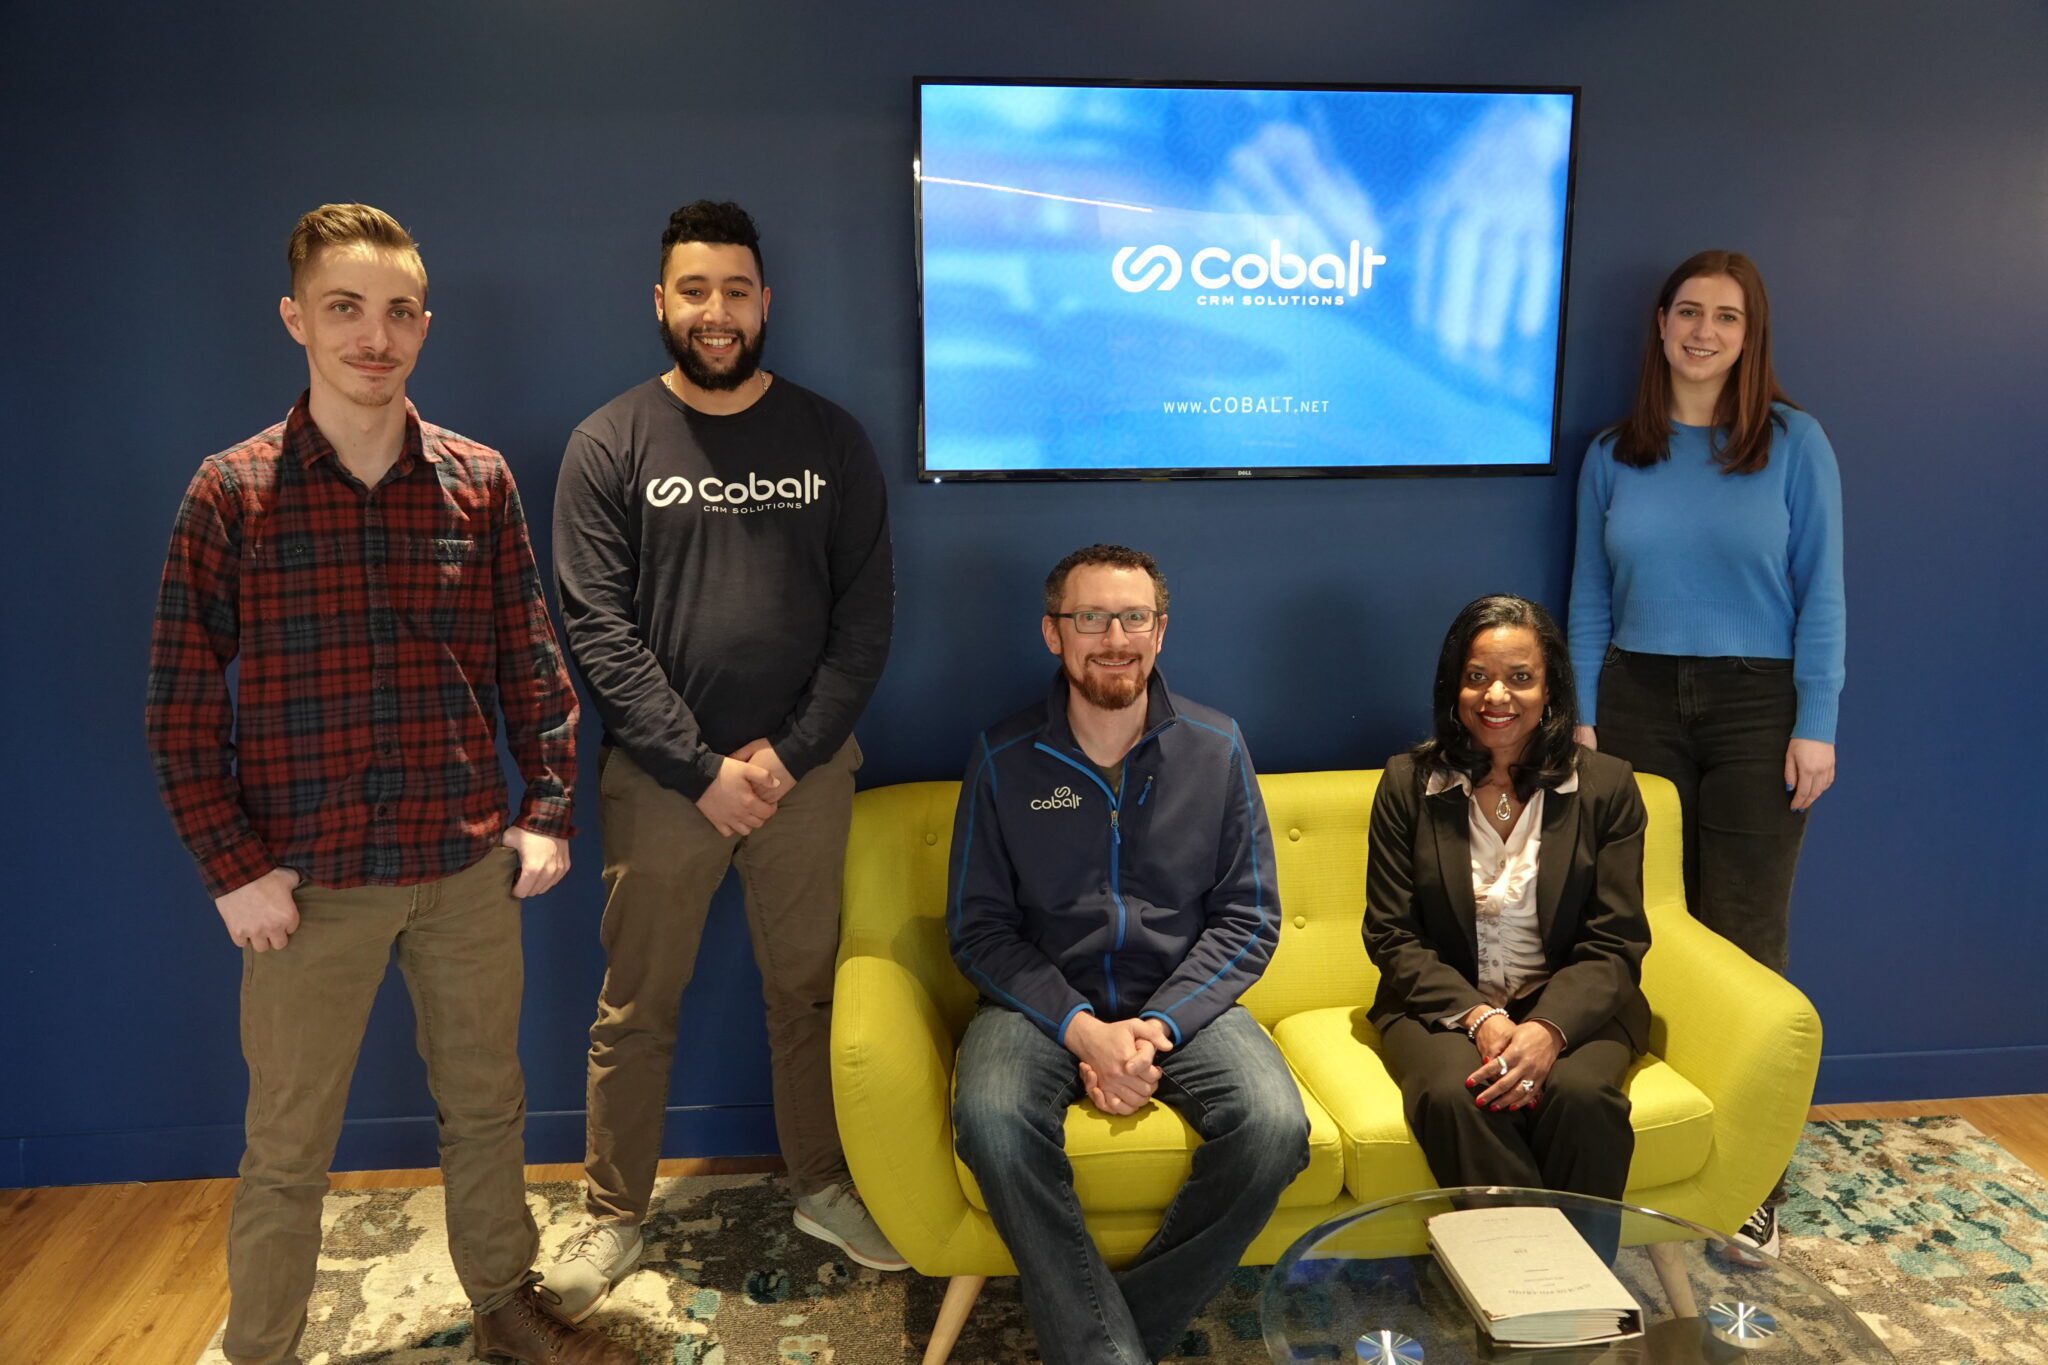 The image is a group photo of Cobalt's support team for associations in the lobby of their Washington D.C. office. Training and support are one of the significant factors that affect AMS cost over time.